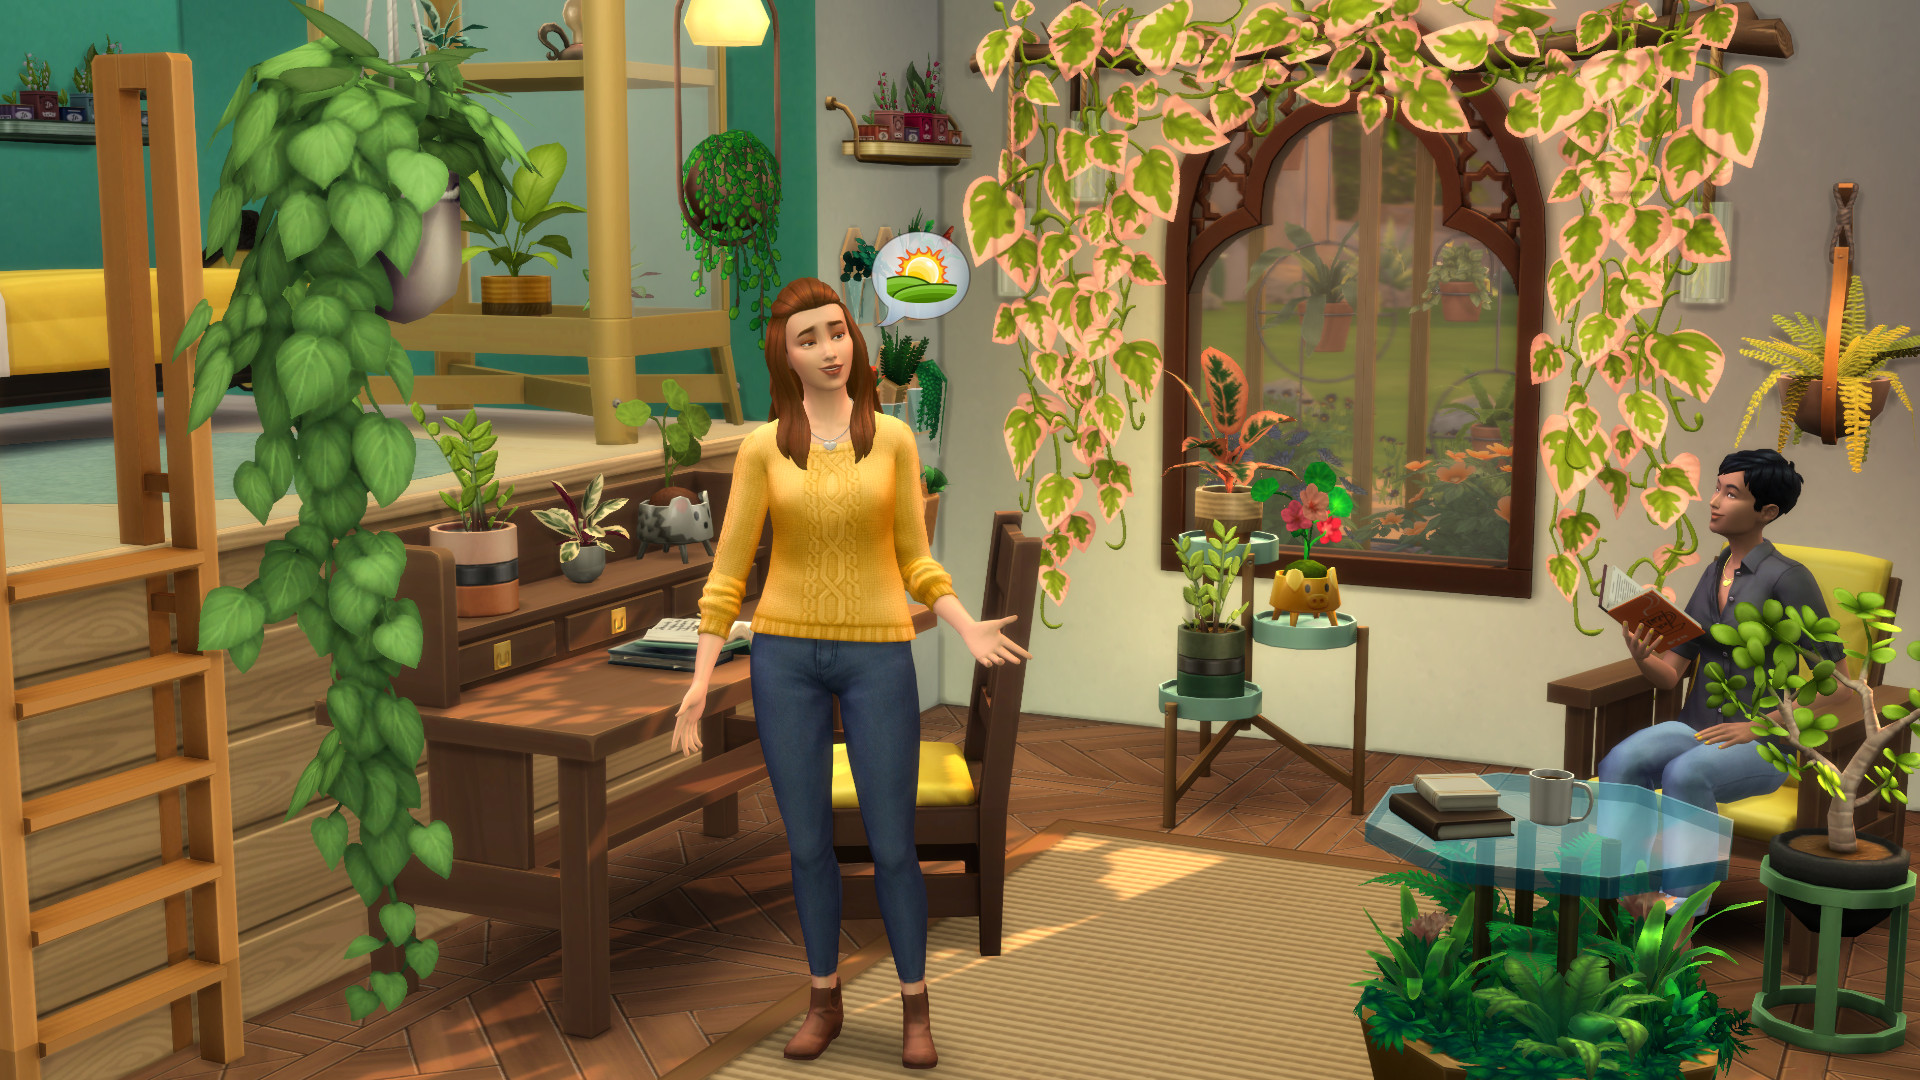 Sims 4 scenarios are live, and the first limited-time scenario runs this week only